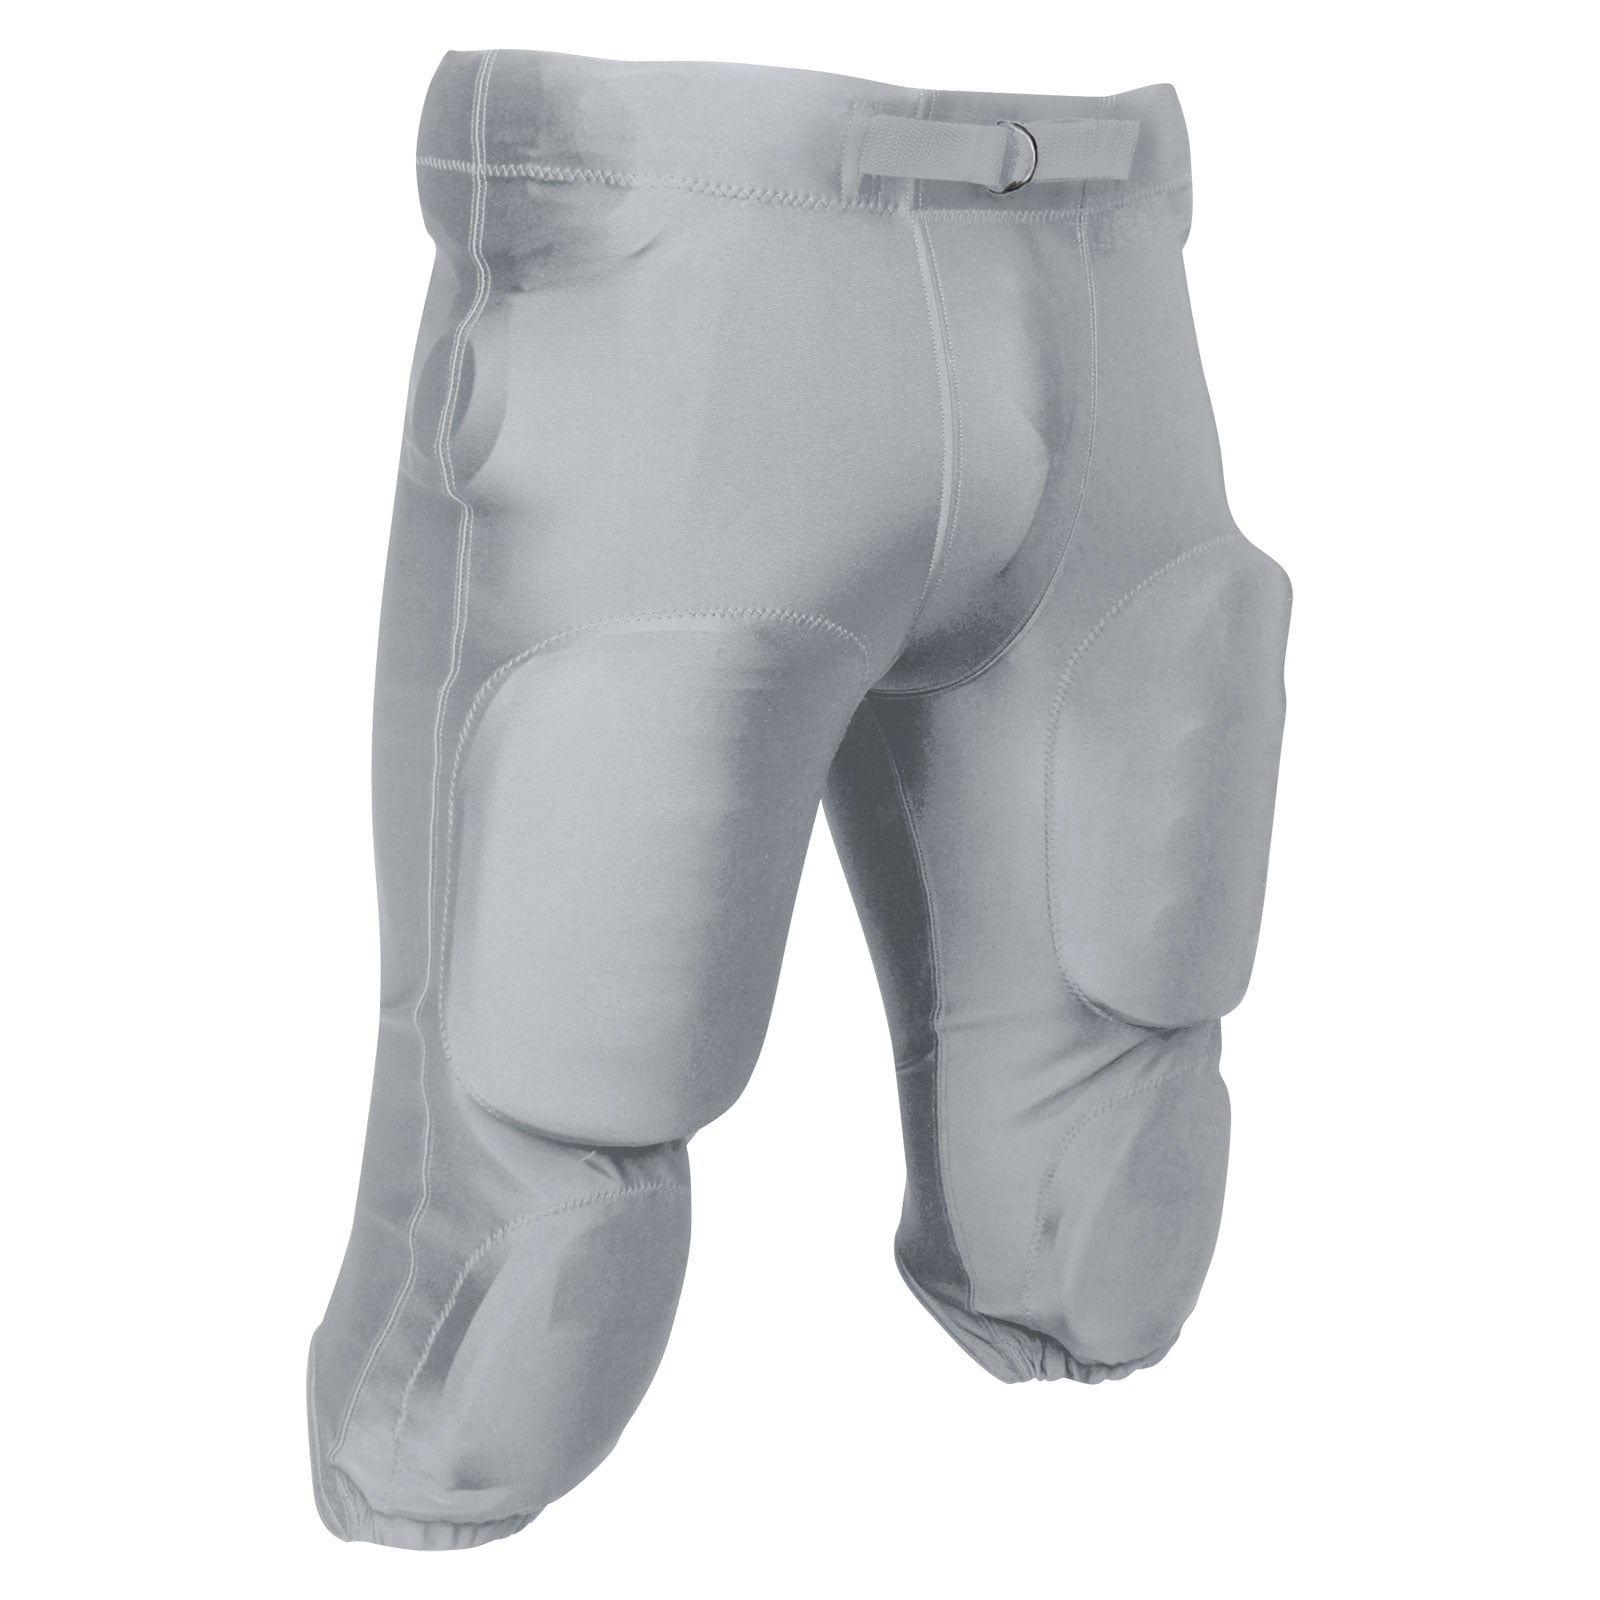 ADAMS Slotted Football Pants YDGP-791 Silver Youth SML 